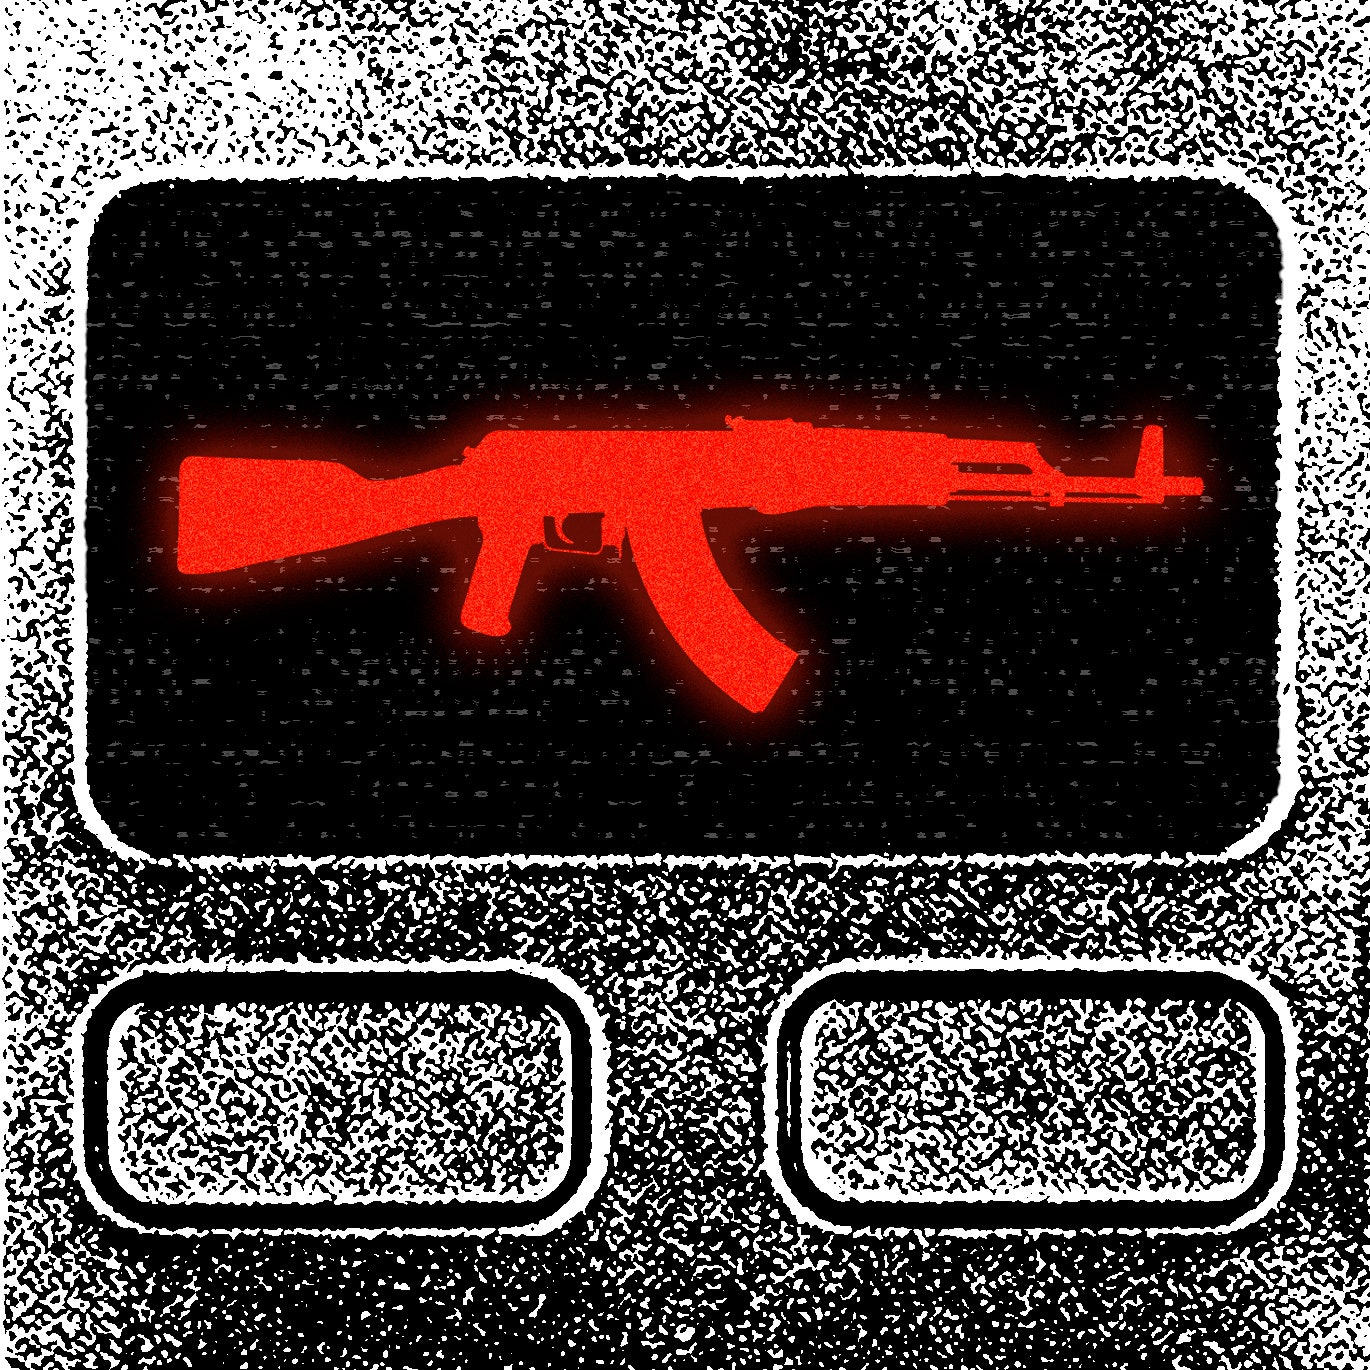 A BitCoin hardware wallet displaying an AK47 on the screen